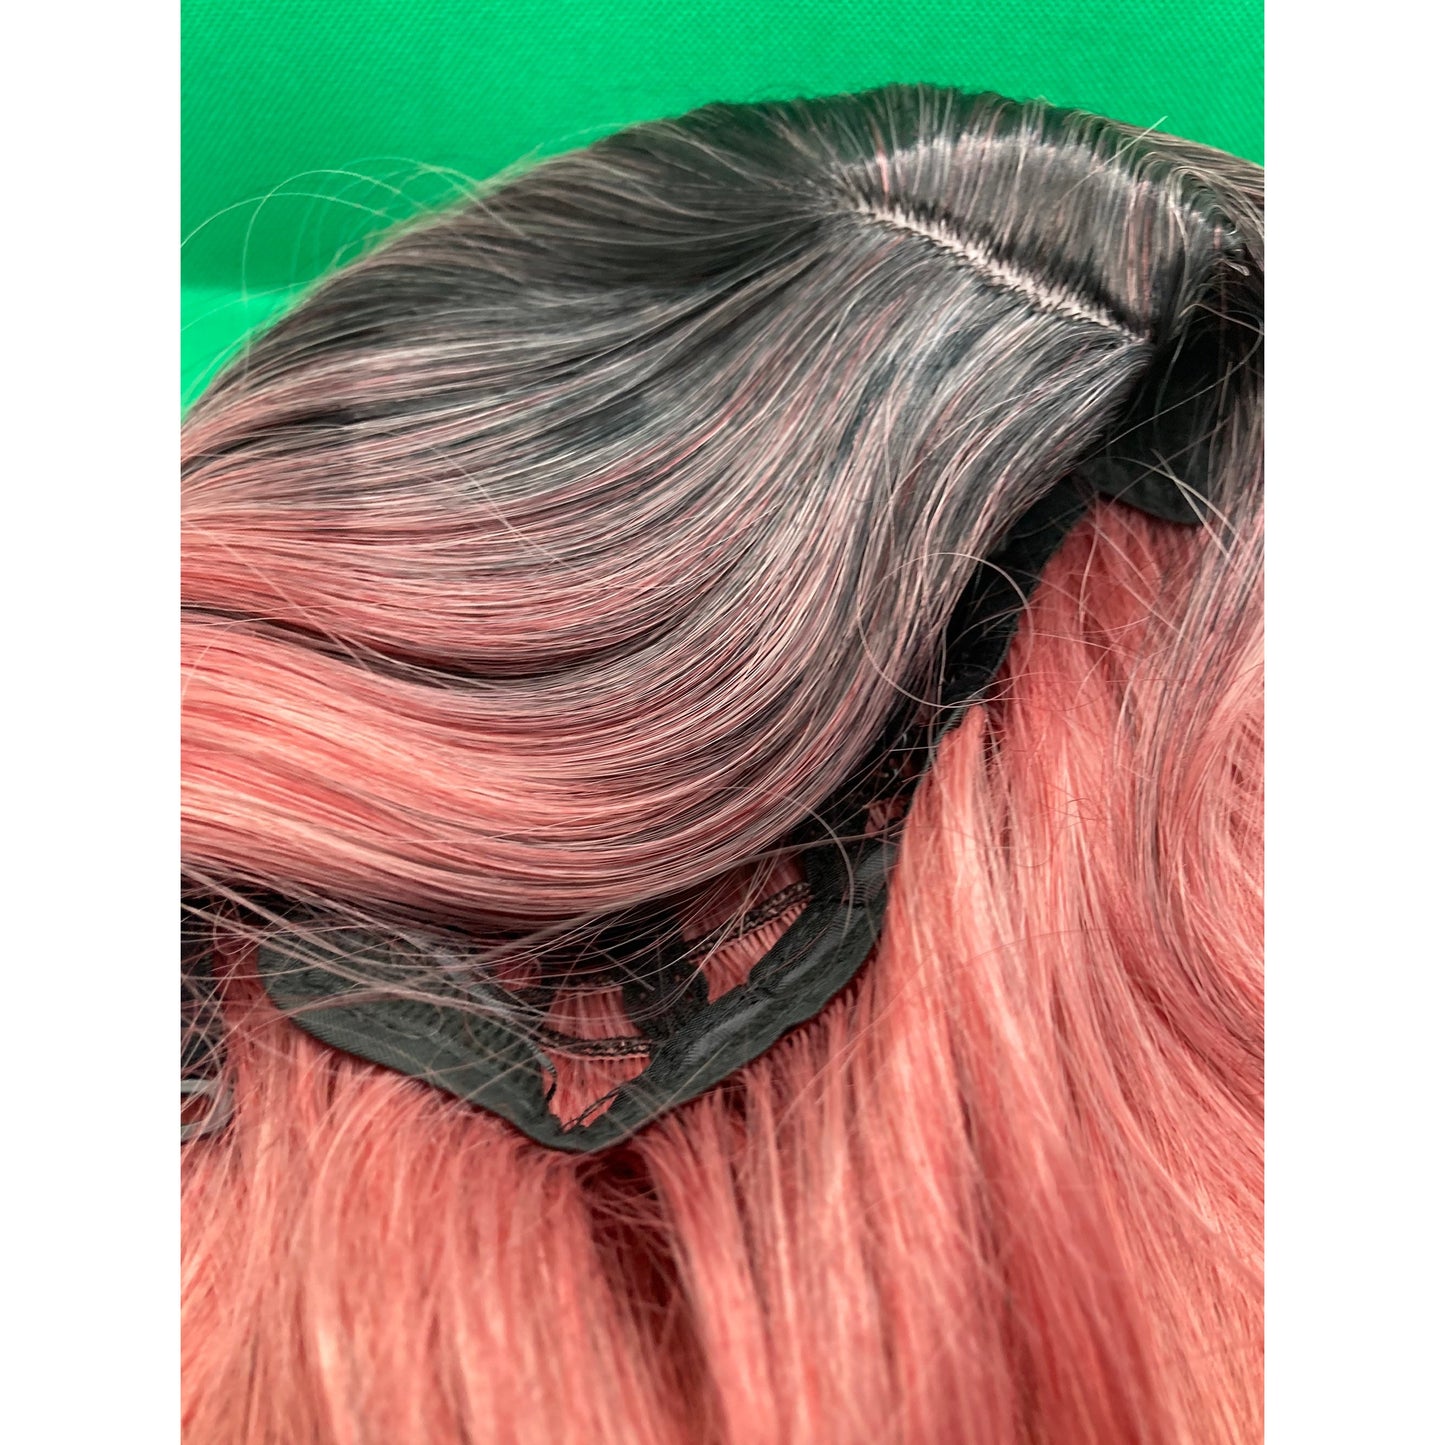 Black Root Pink Long Curly Wig